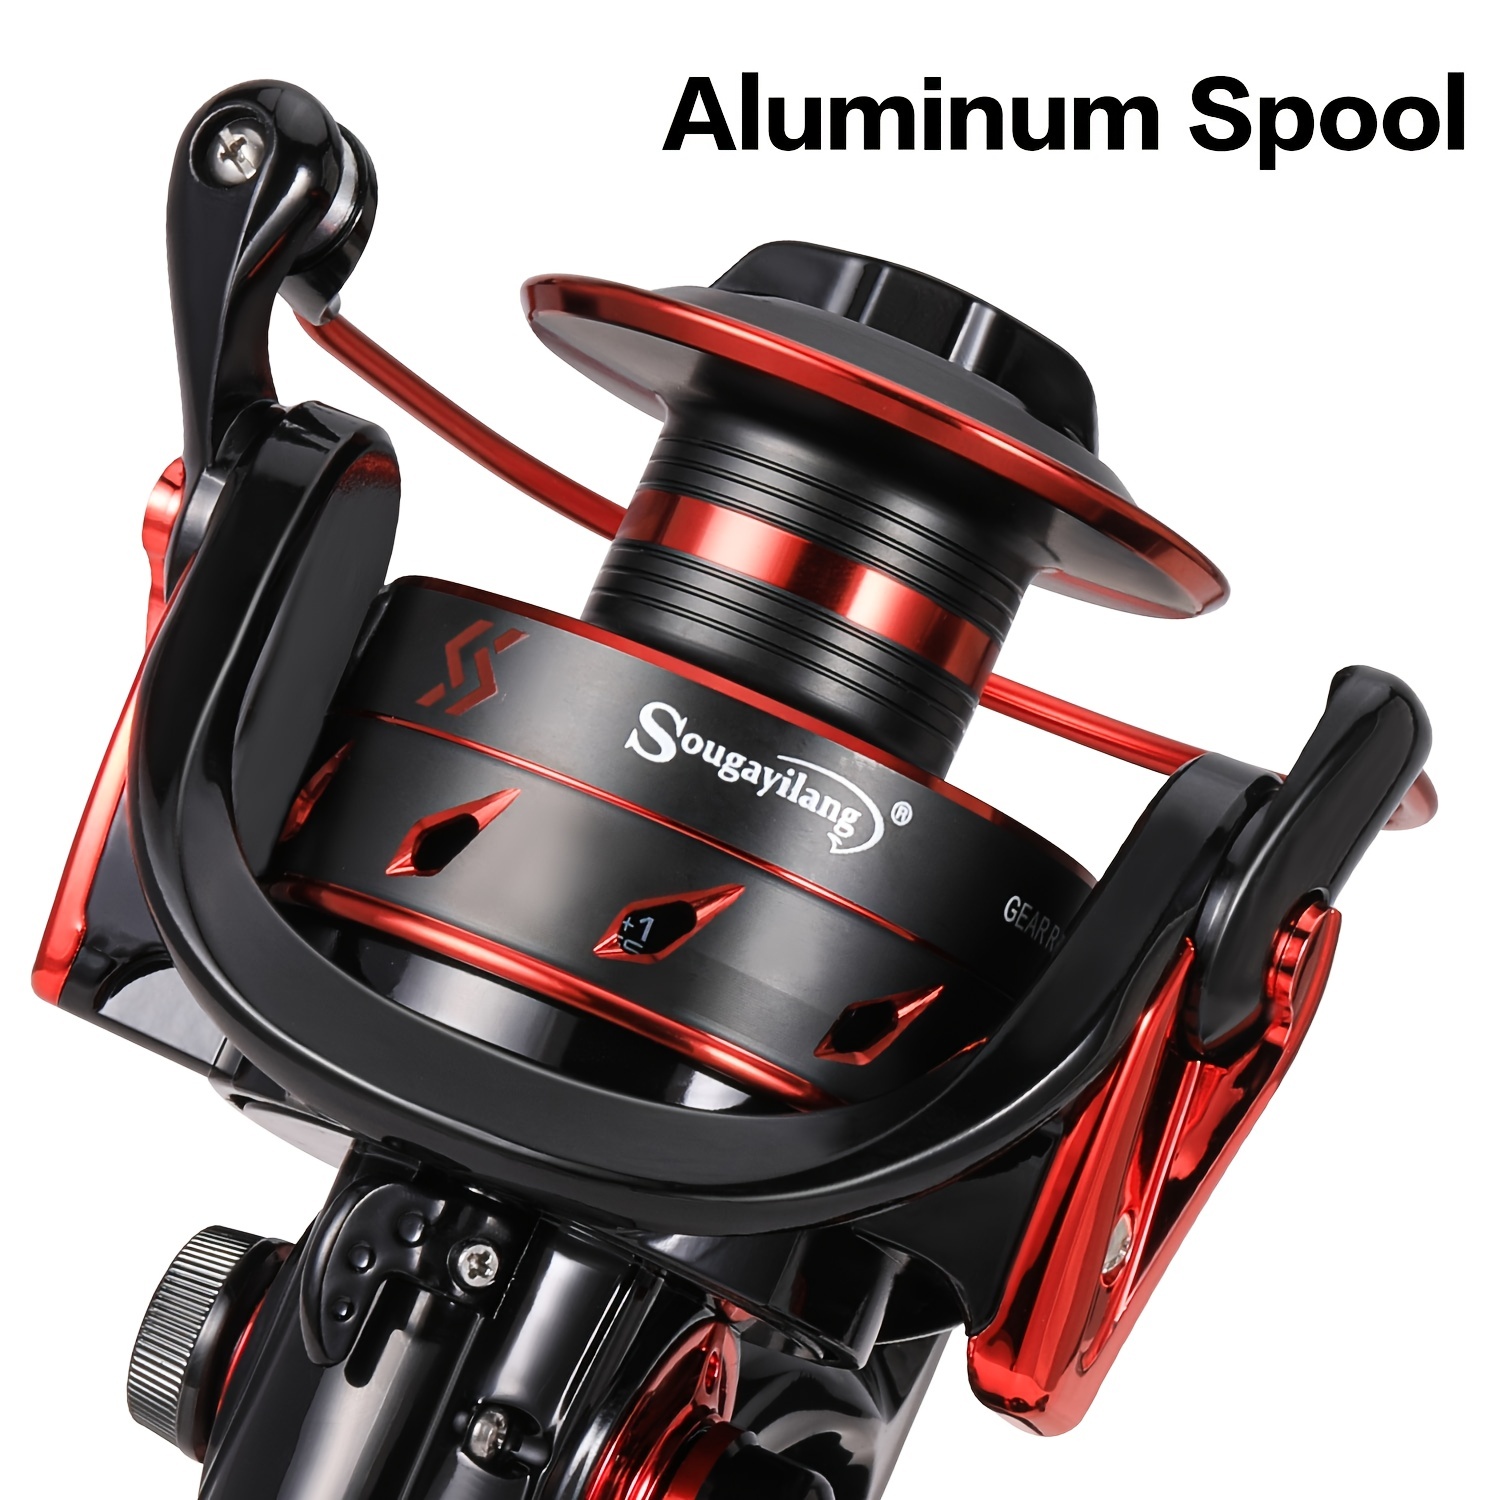 Sougayilang Round Baitcasting Reel with Star Drag Reinforced